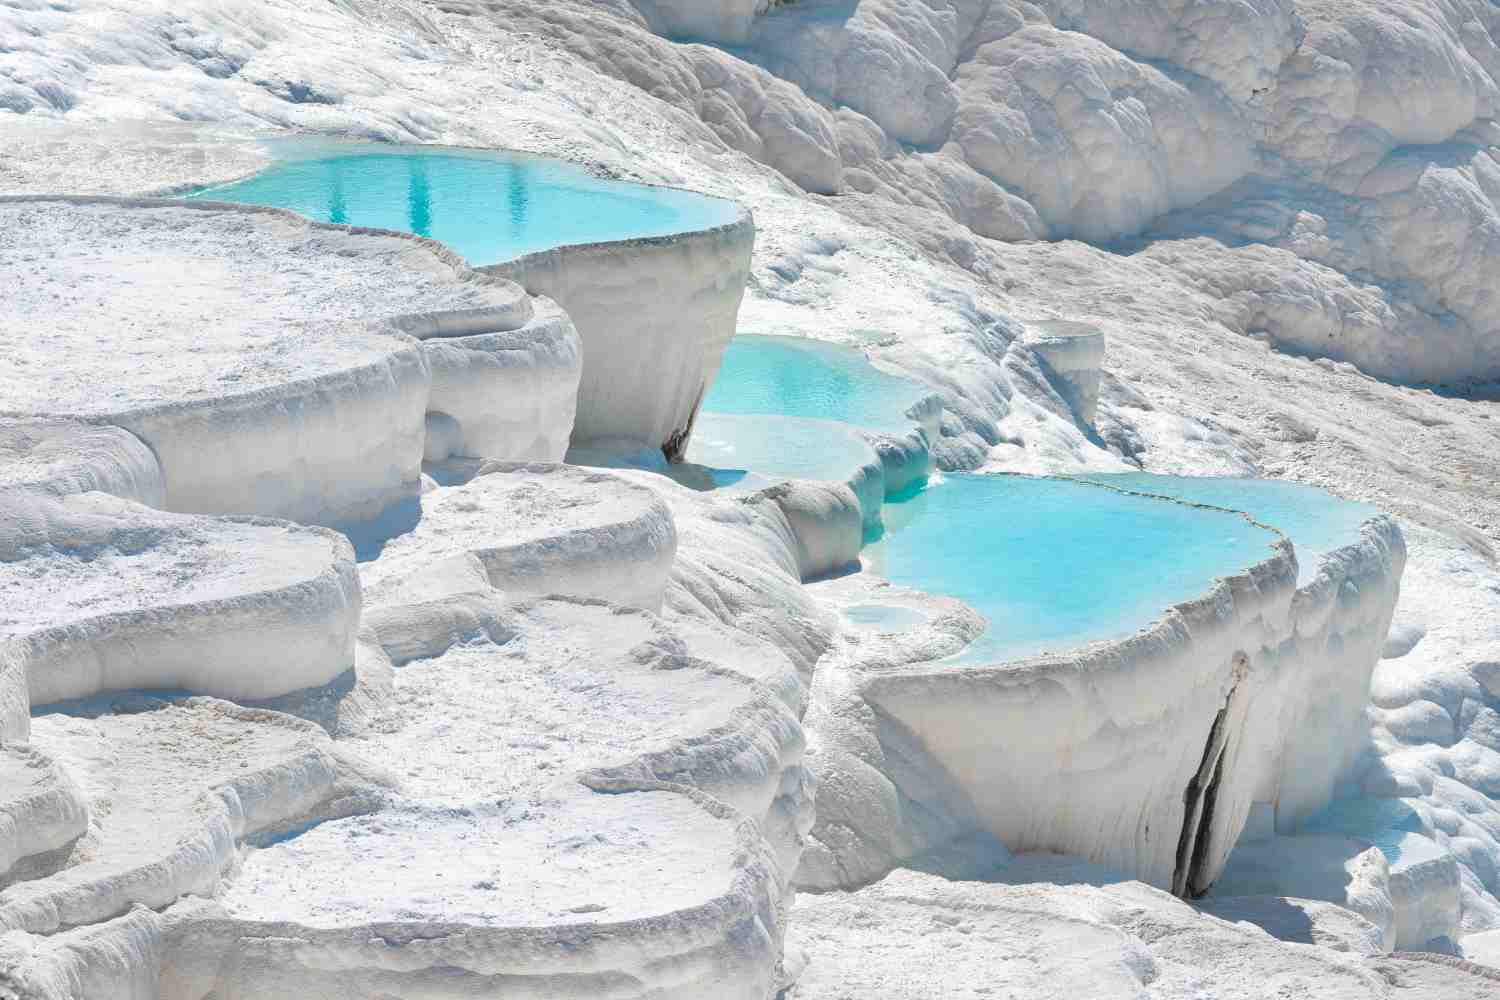 Excursion to Pamukkale from Dalaman area, Pamukkale is one of the most exquisite displays of the beauty of nature that you can imagine. White travertine terraces of bright blue water and snow-white limestone decorate the valley sides of Pamukkale, known as the ‘Cotton Castle’. These unique natural formations make a trip to Pamukkale an unmissable highlight of any tour of Turkey. These natural pools were formed as a result of centuries of limestone erosion by thermal springs, and the mineral-rich water of Pamukkale’s pools have long-since attracted visitors thanks to their reputedly therapeutic properties. Hierapolis, the ancient city built around Pamukkale’s natural pools, pays testament to this, as it was constructed around the 2nd-century BC as a spa town to make the most of the warm, mineral-rich waters of this region.